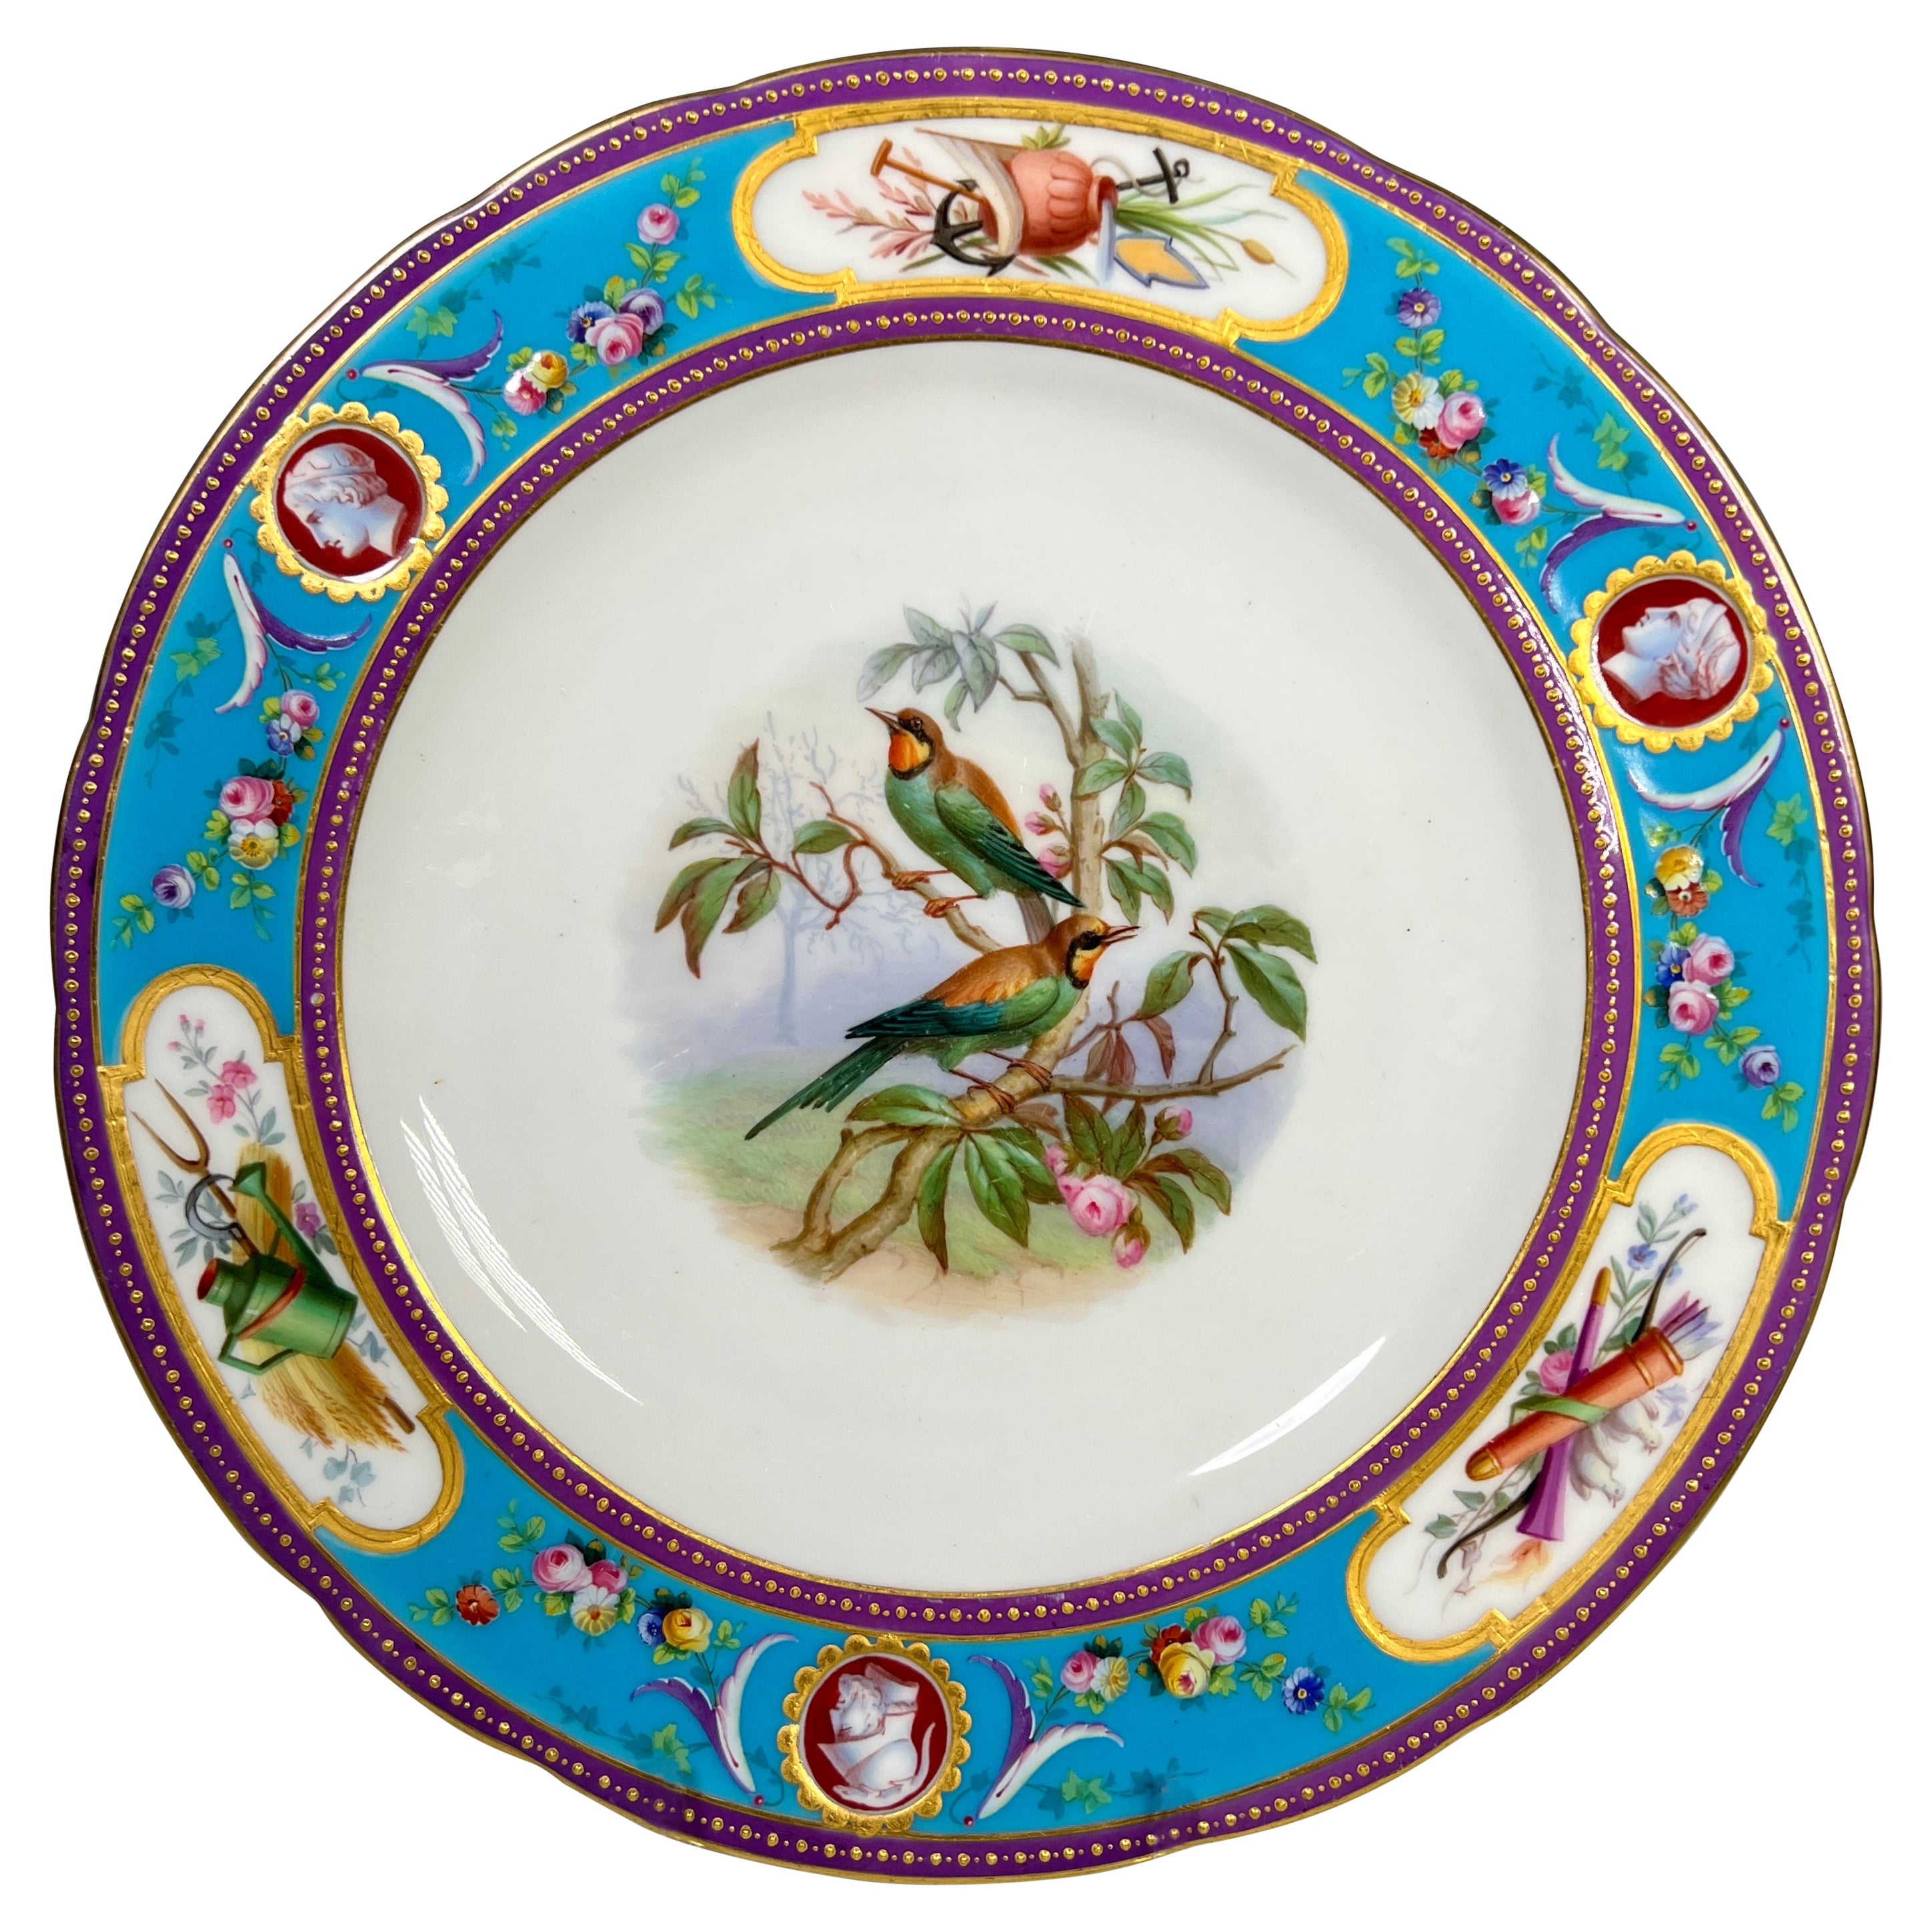 Minton Ca 1866 Dessert Set Hand Painted Birds Turquoise with Cameo Reserves